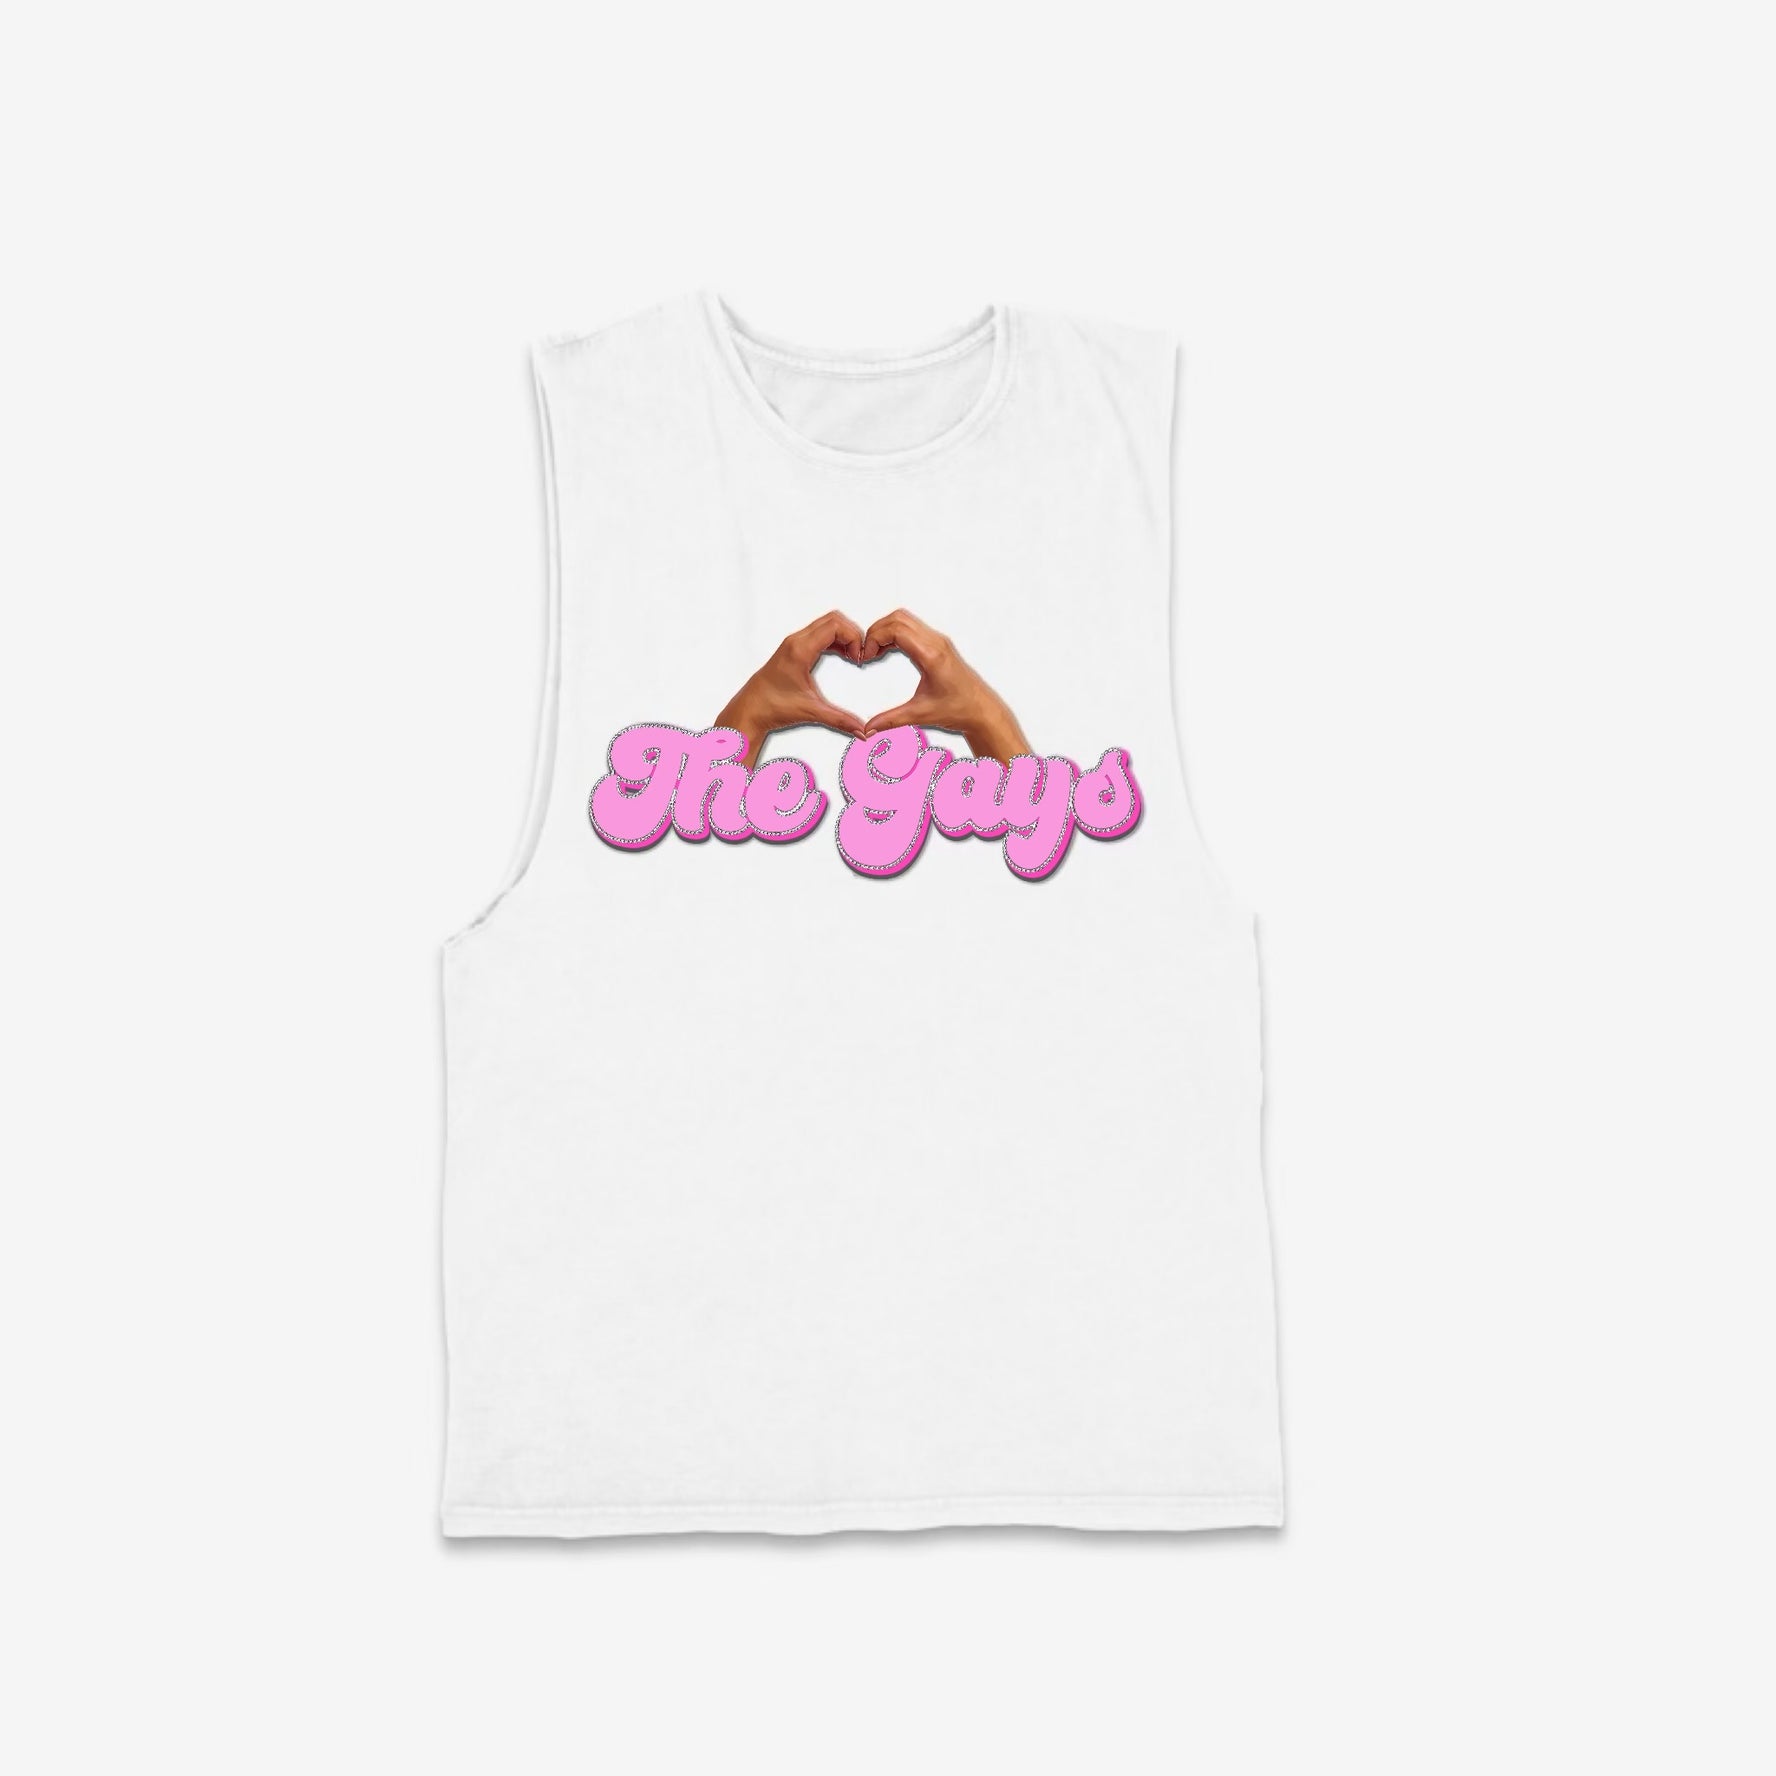 "The Gays" Tank Top